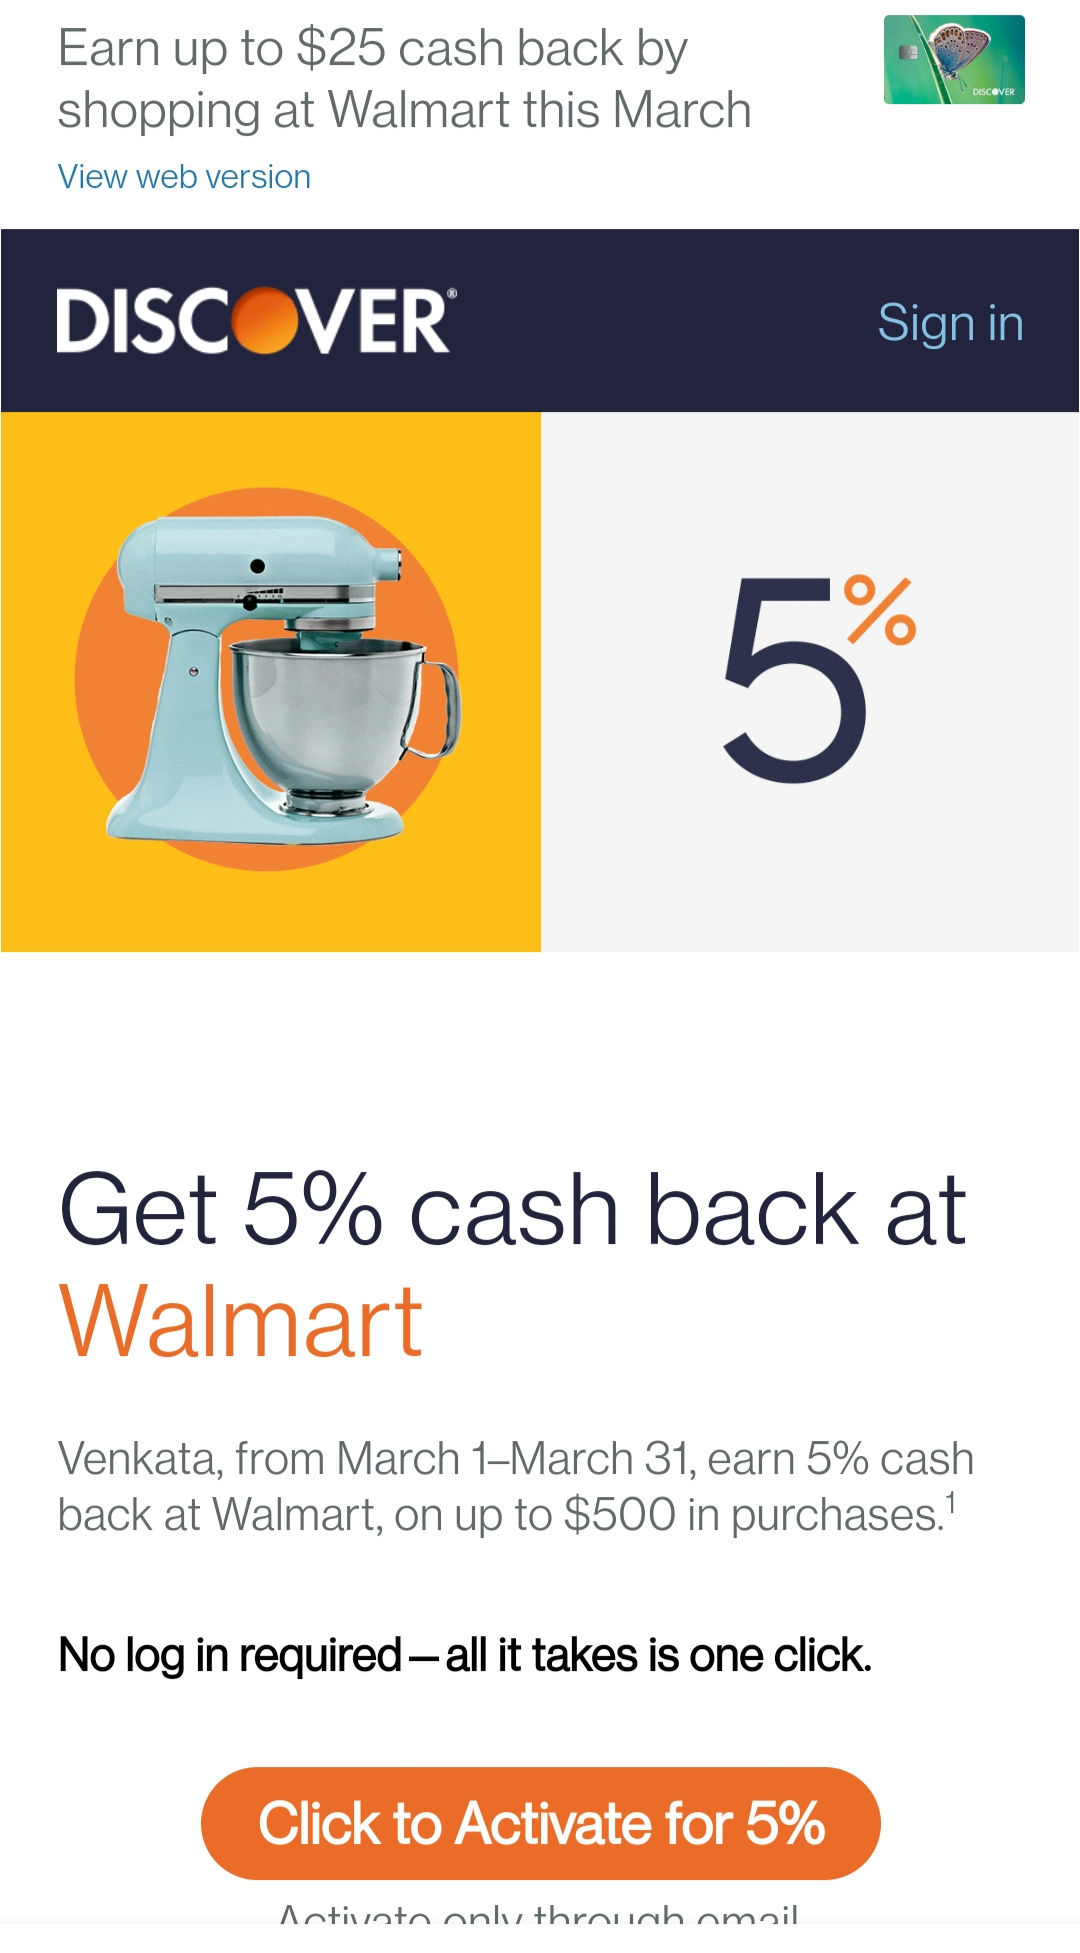 [YMMV] Discover, Activate now to earn 5% cash back on Walmart $0